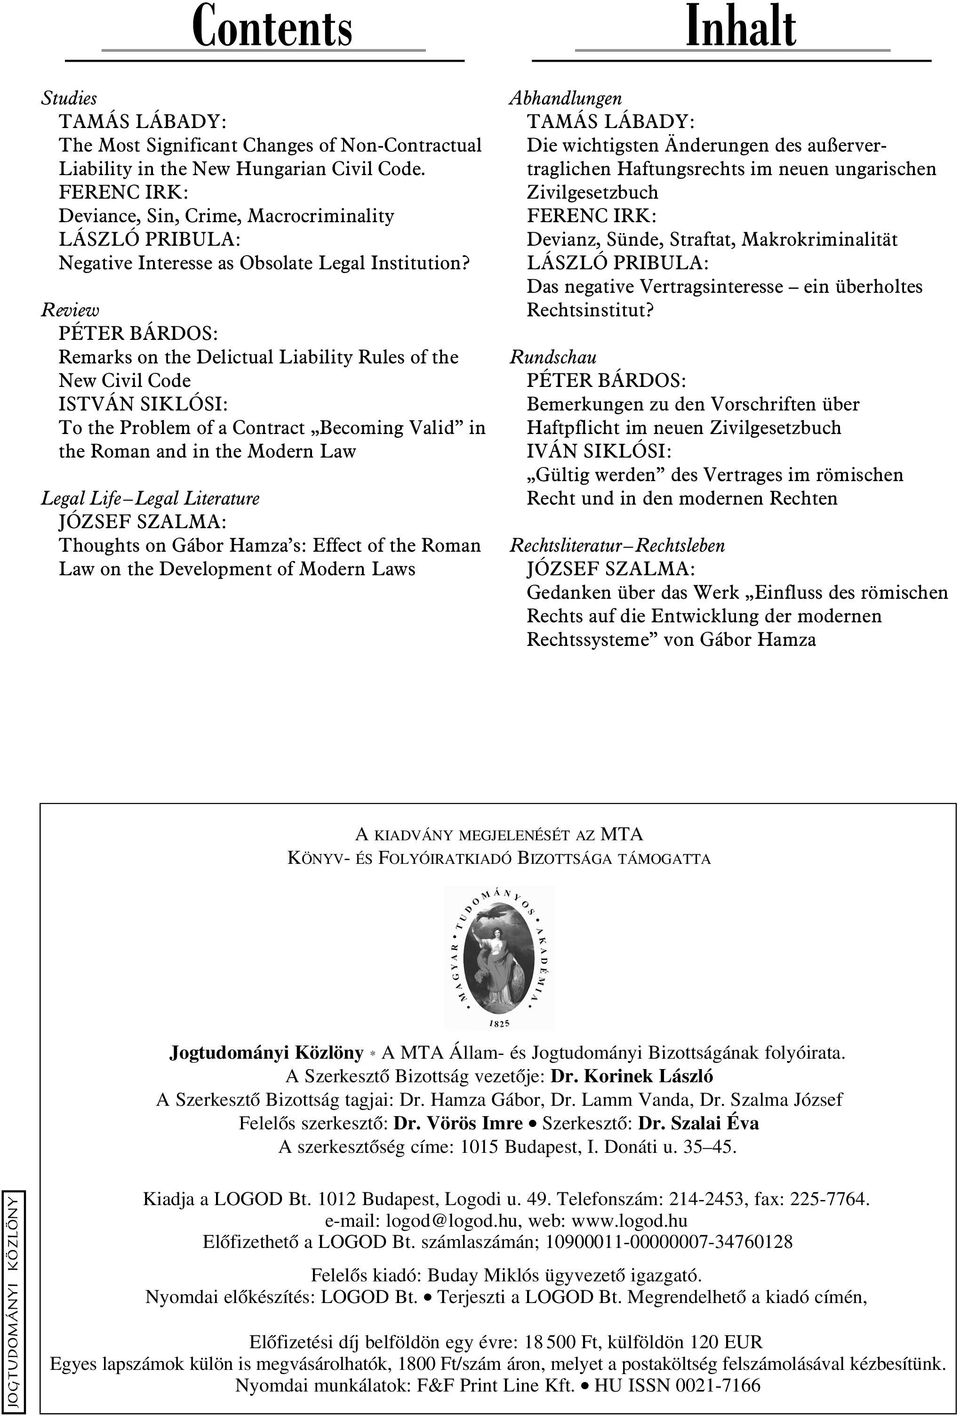 Review PÉTER BÁRDOS: Remarks on the Delictual Liability Rules of the New Civil Code ISTVÁN SIKLÓSI: To the Problem of a Contract Becoming Valid in the Roman and in the Modern Law Legal Life Legal